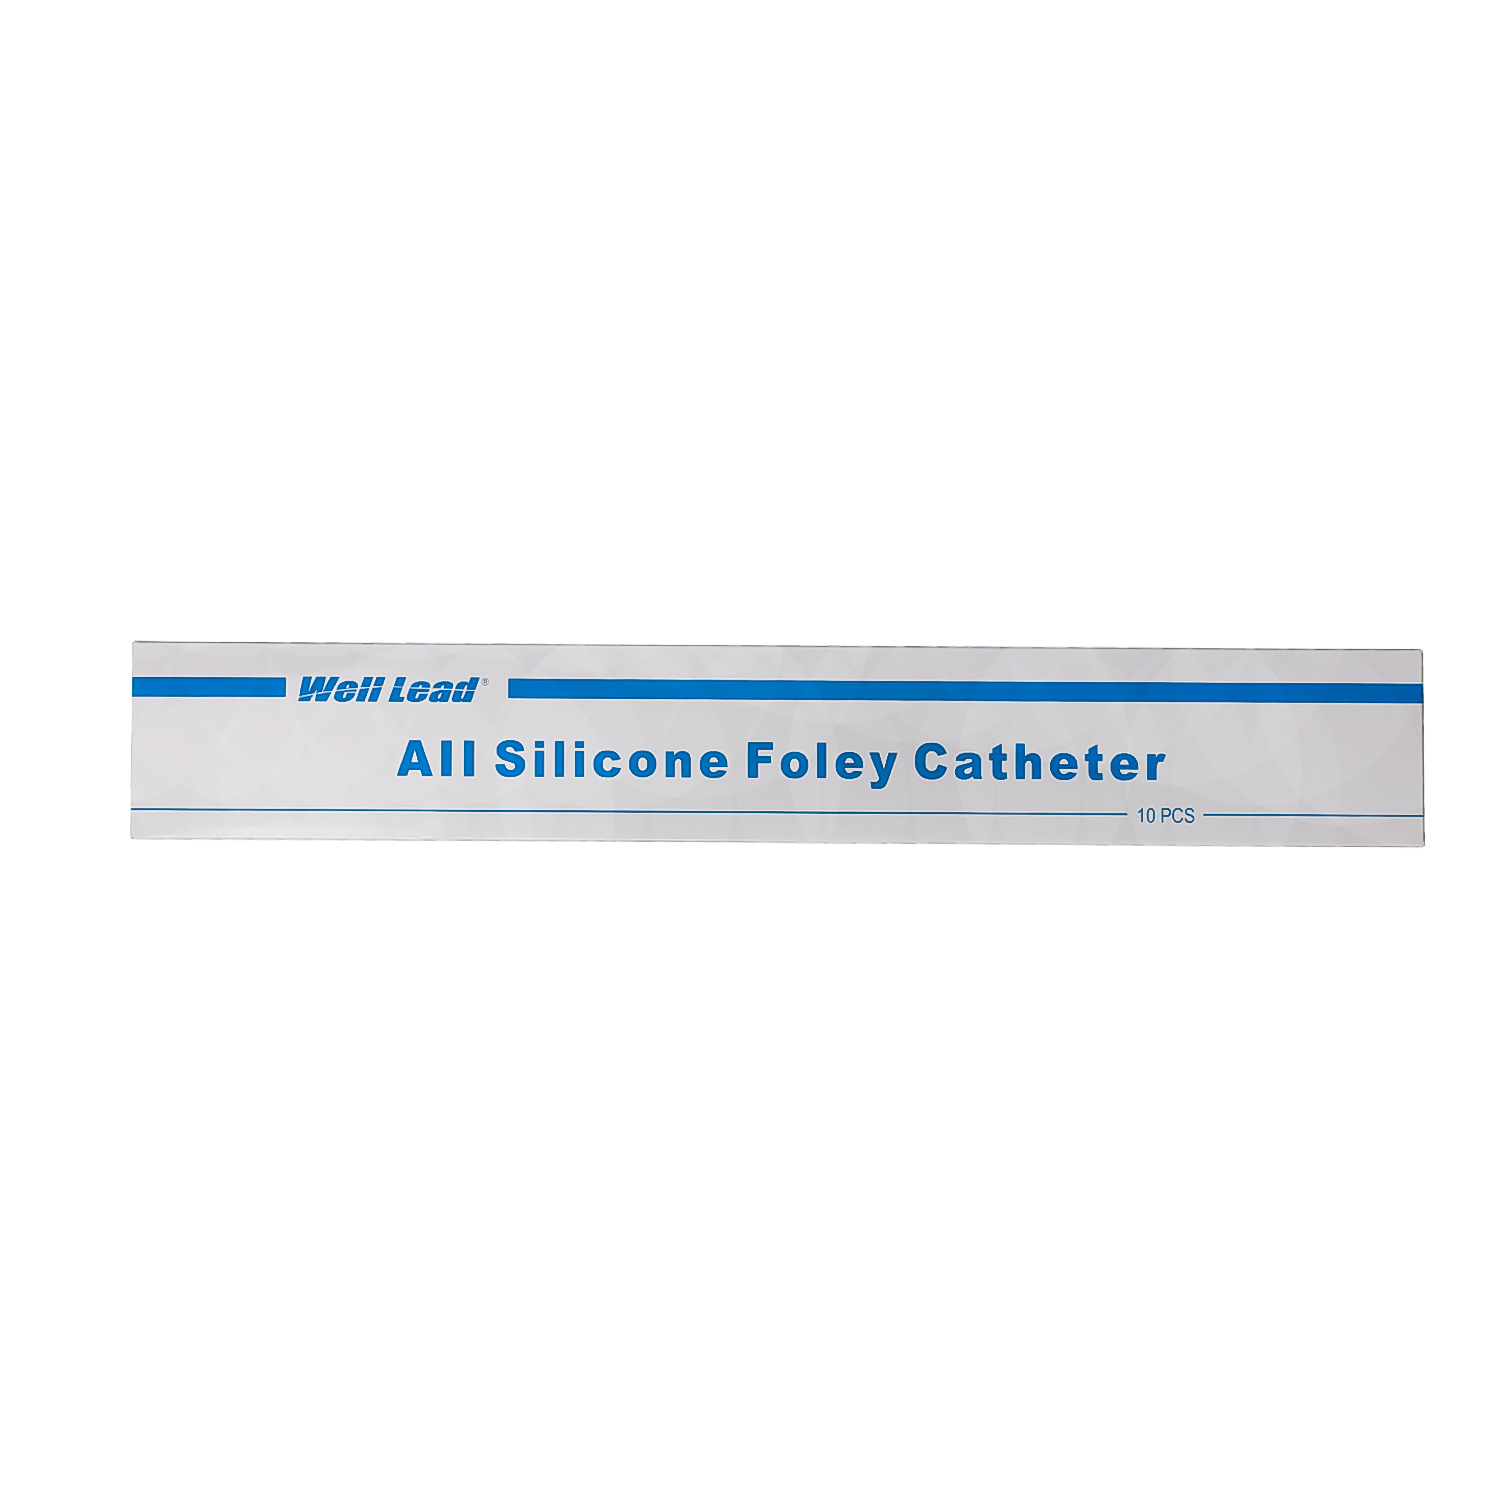 ALL Silicone foley Catheter 18 Fr